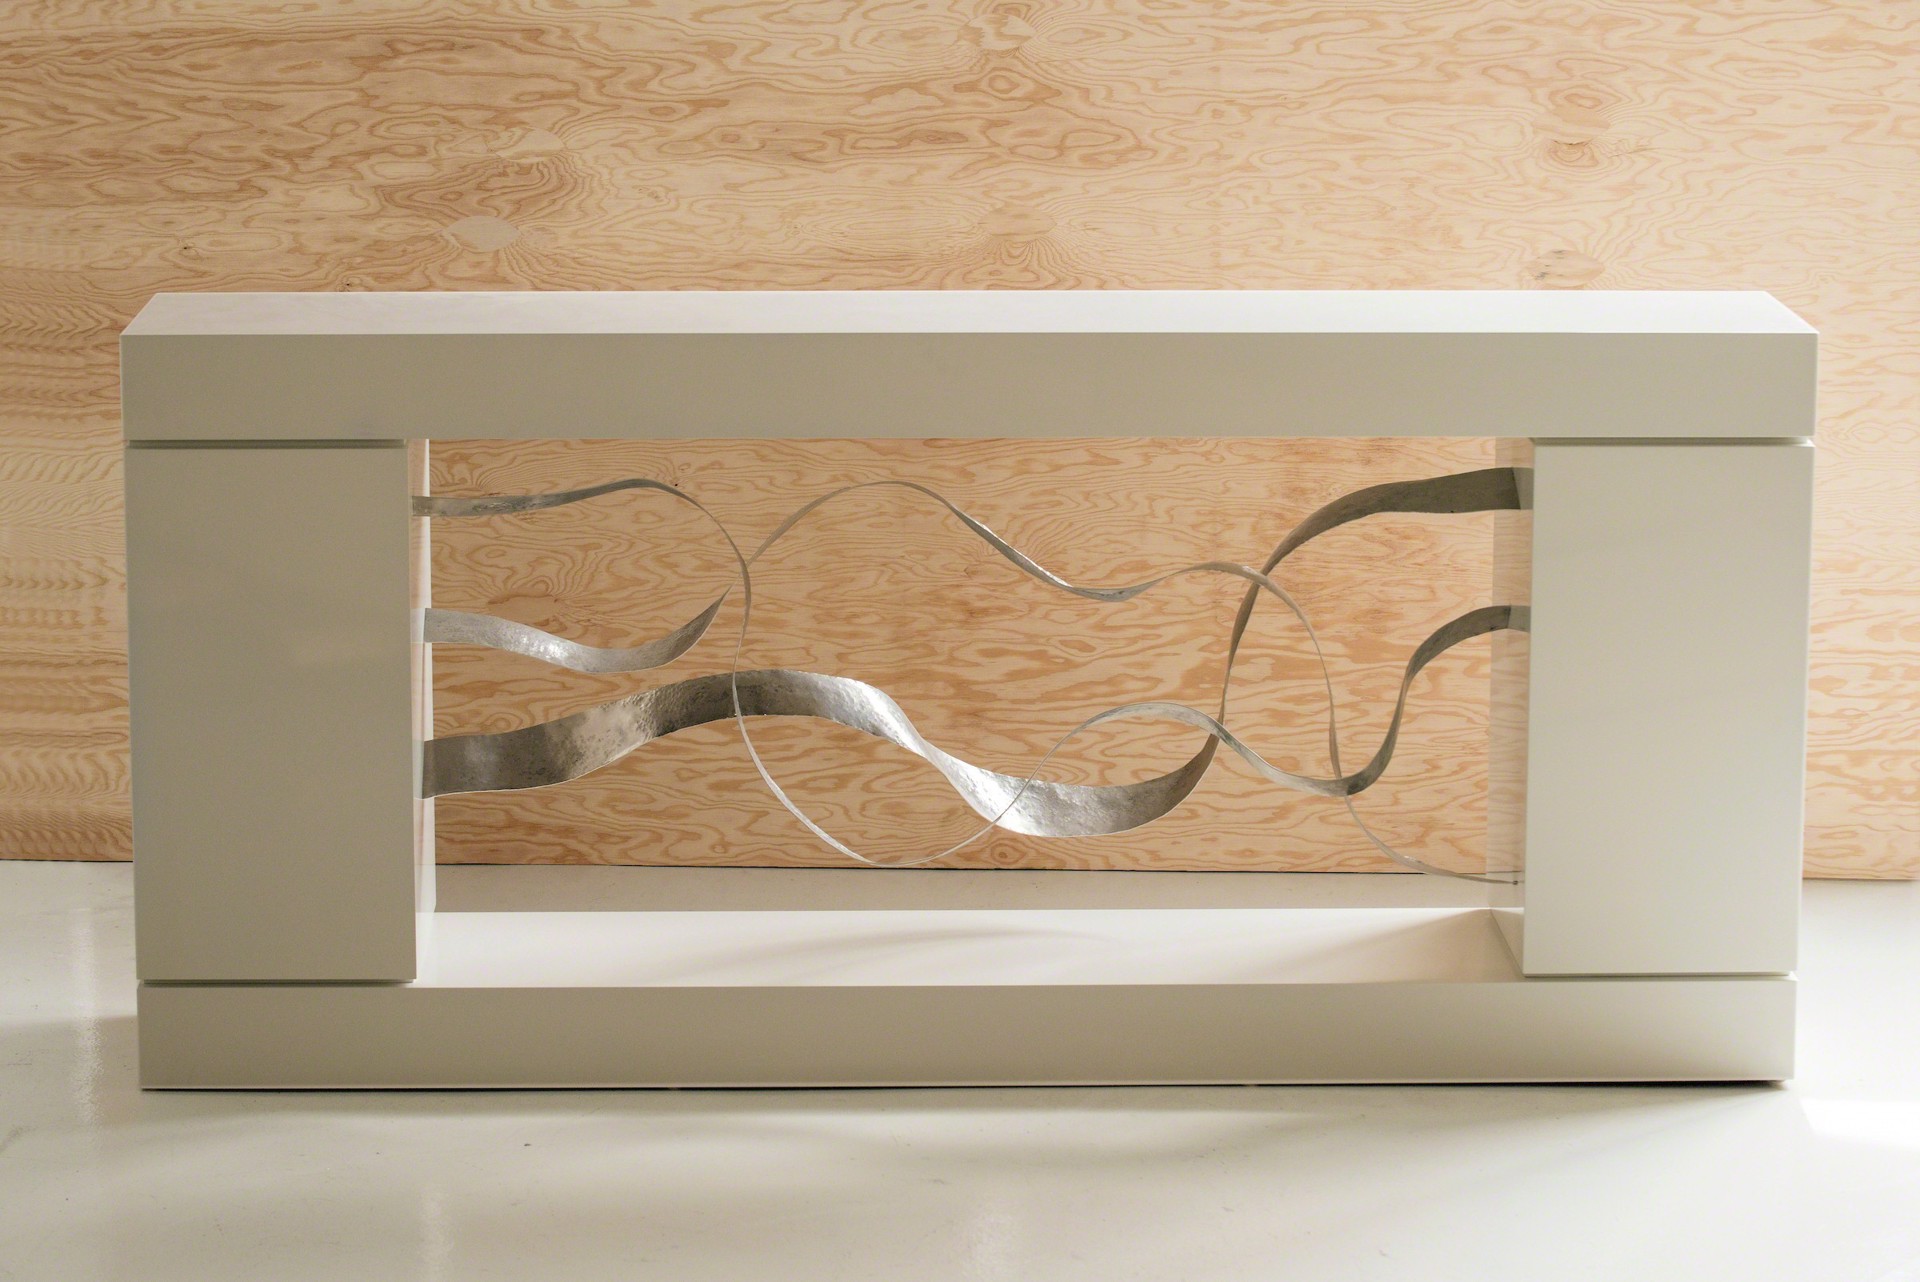 Cabinet-console "Waves" by Jacques Jarrige